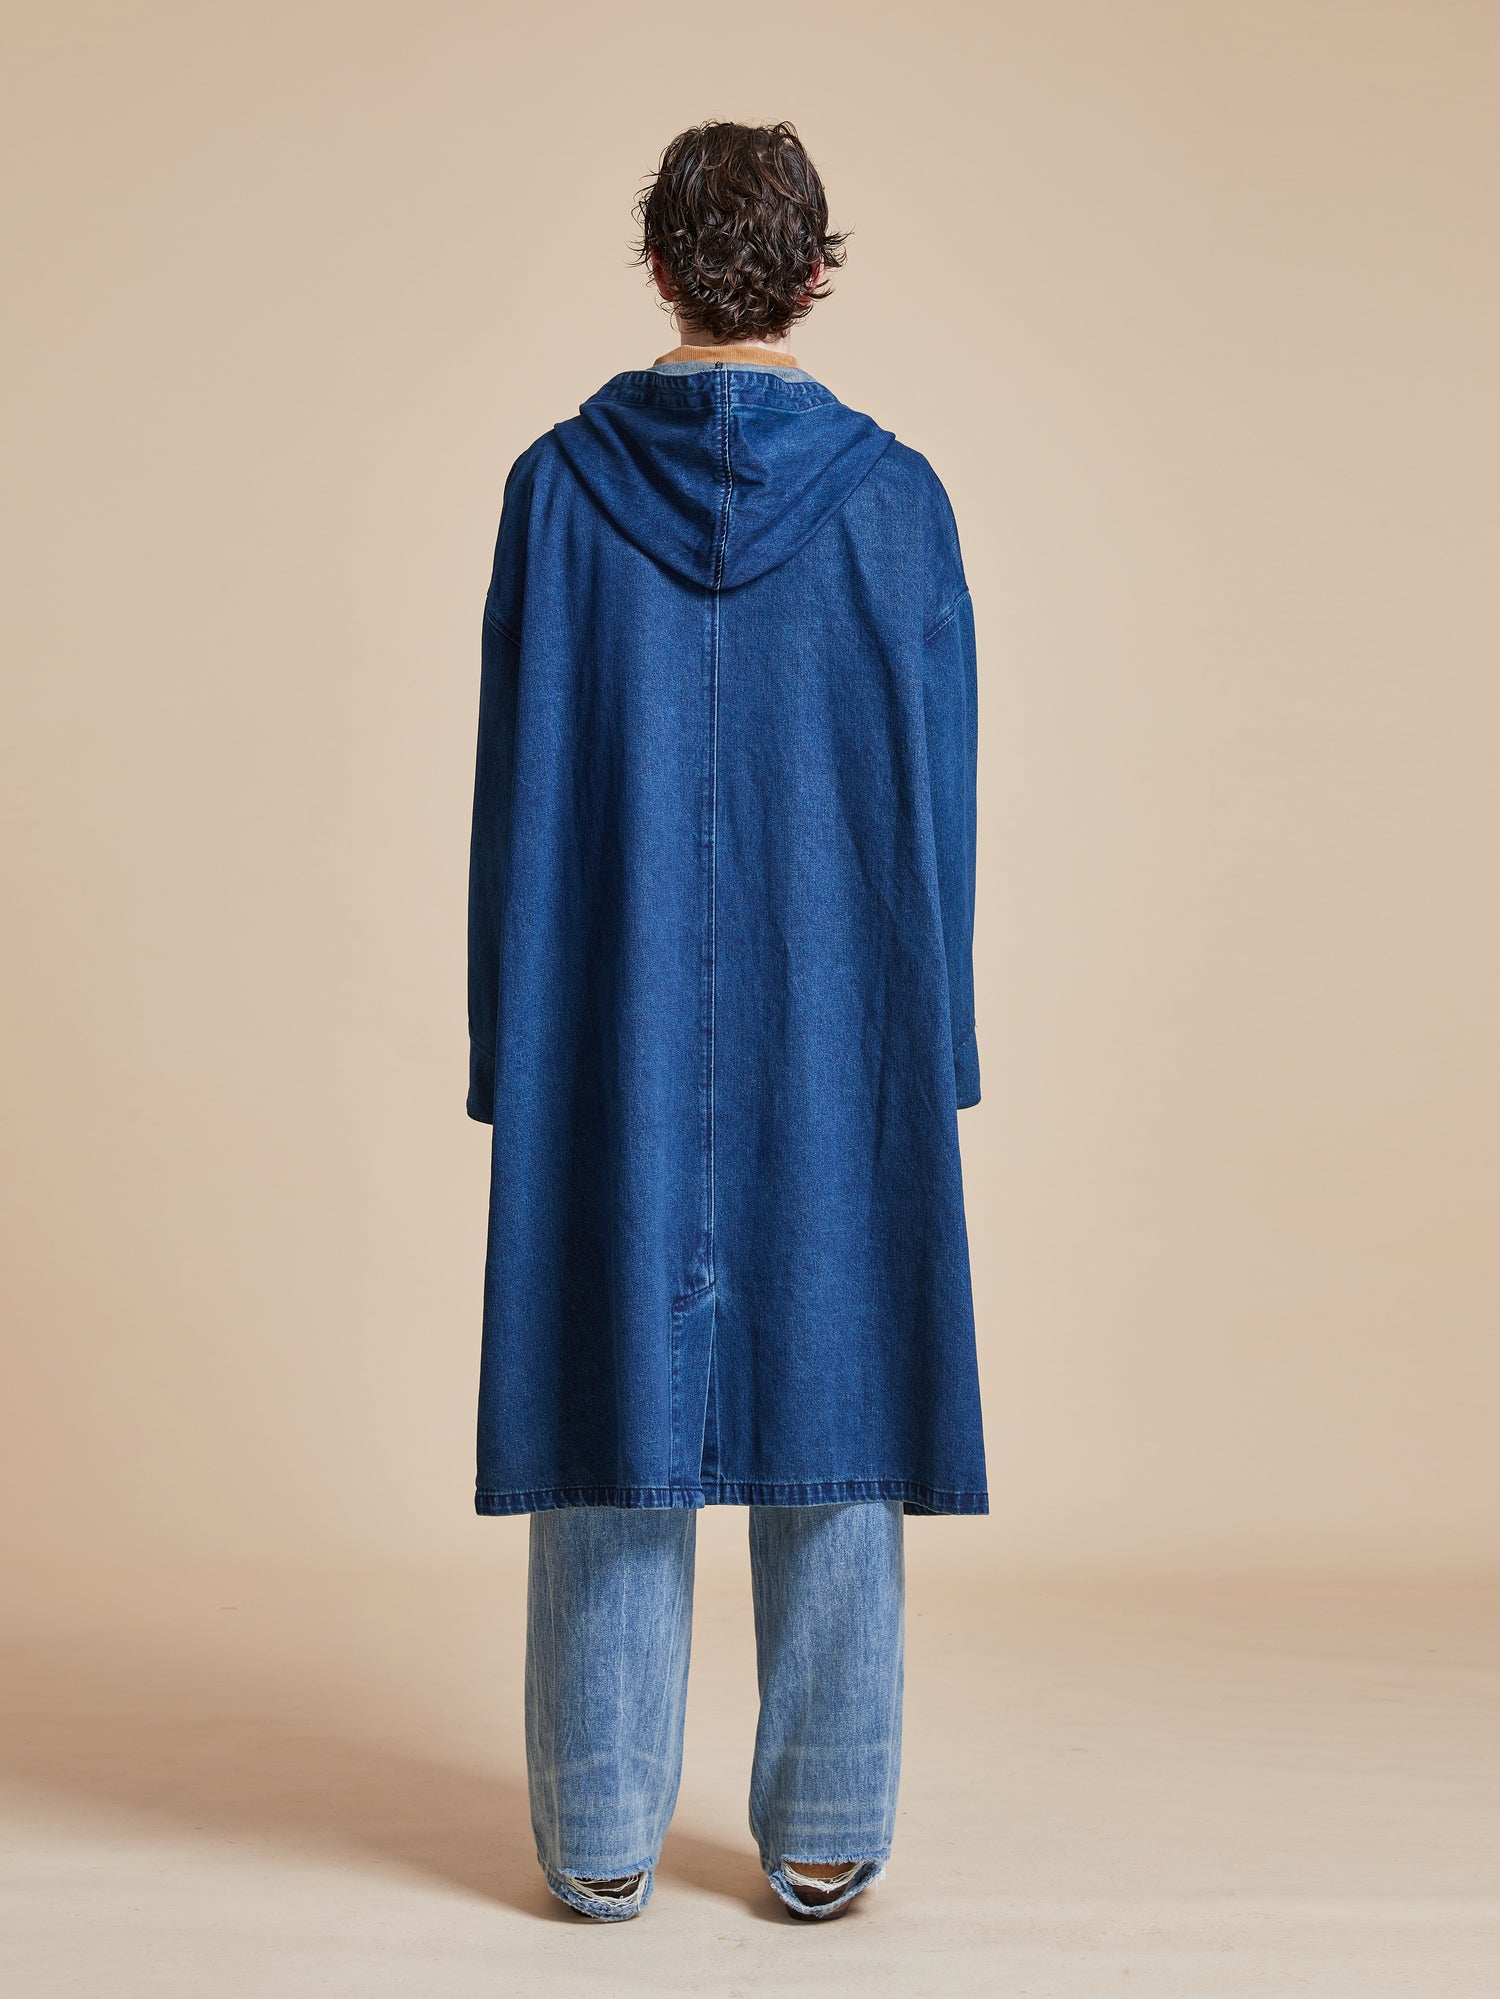 The back view of a man wearing a Sargasso Denim Buckle Coat by Found.